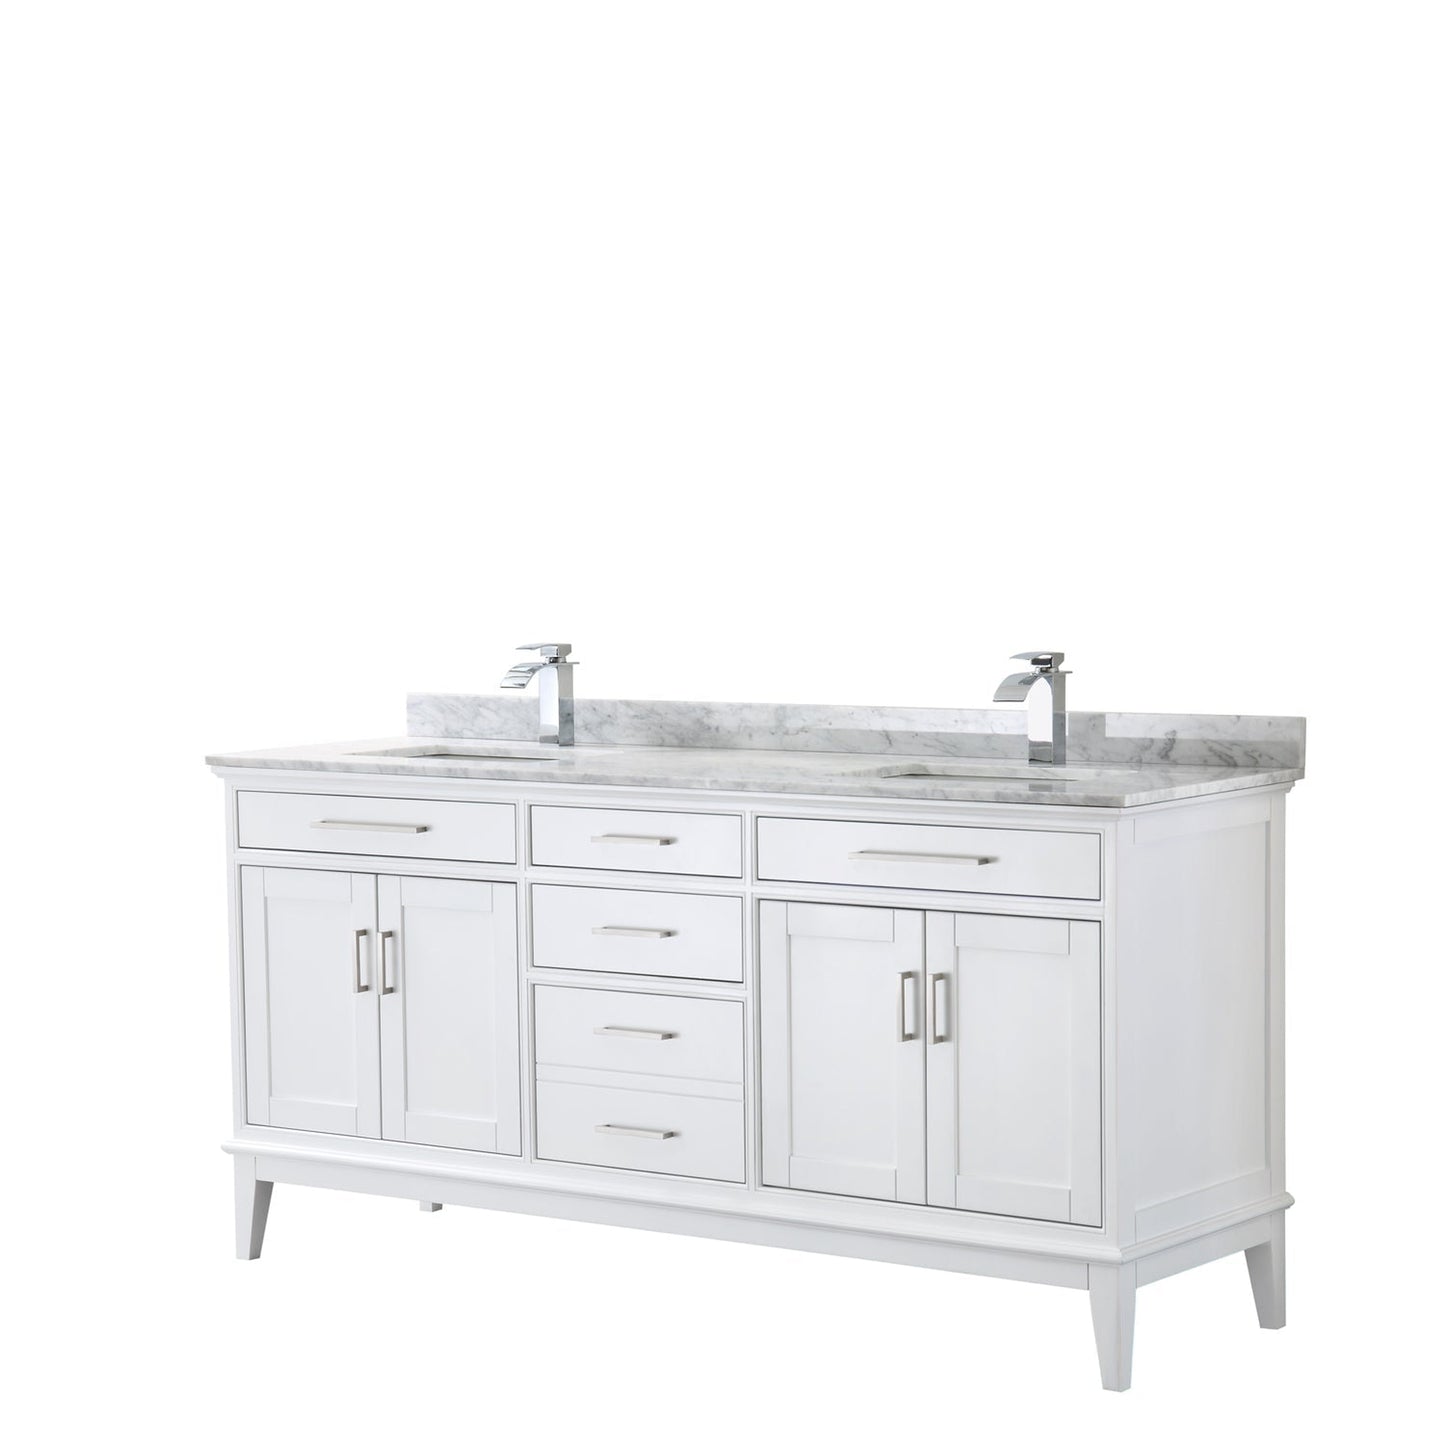 Wyndham Collection Margate 72" Double Bathroom White Vanity With White Carrara Marble Countertop And Undermount Square Sink